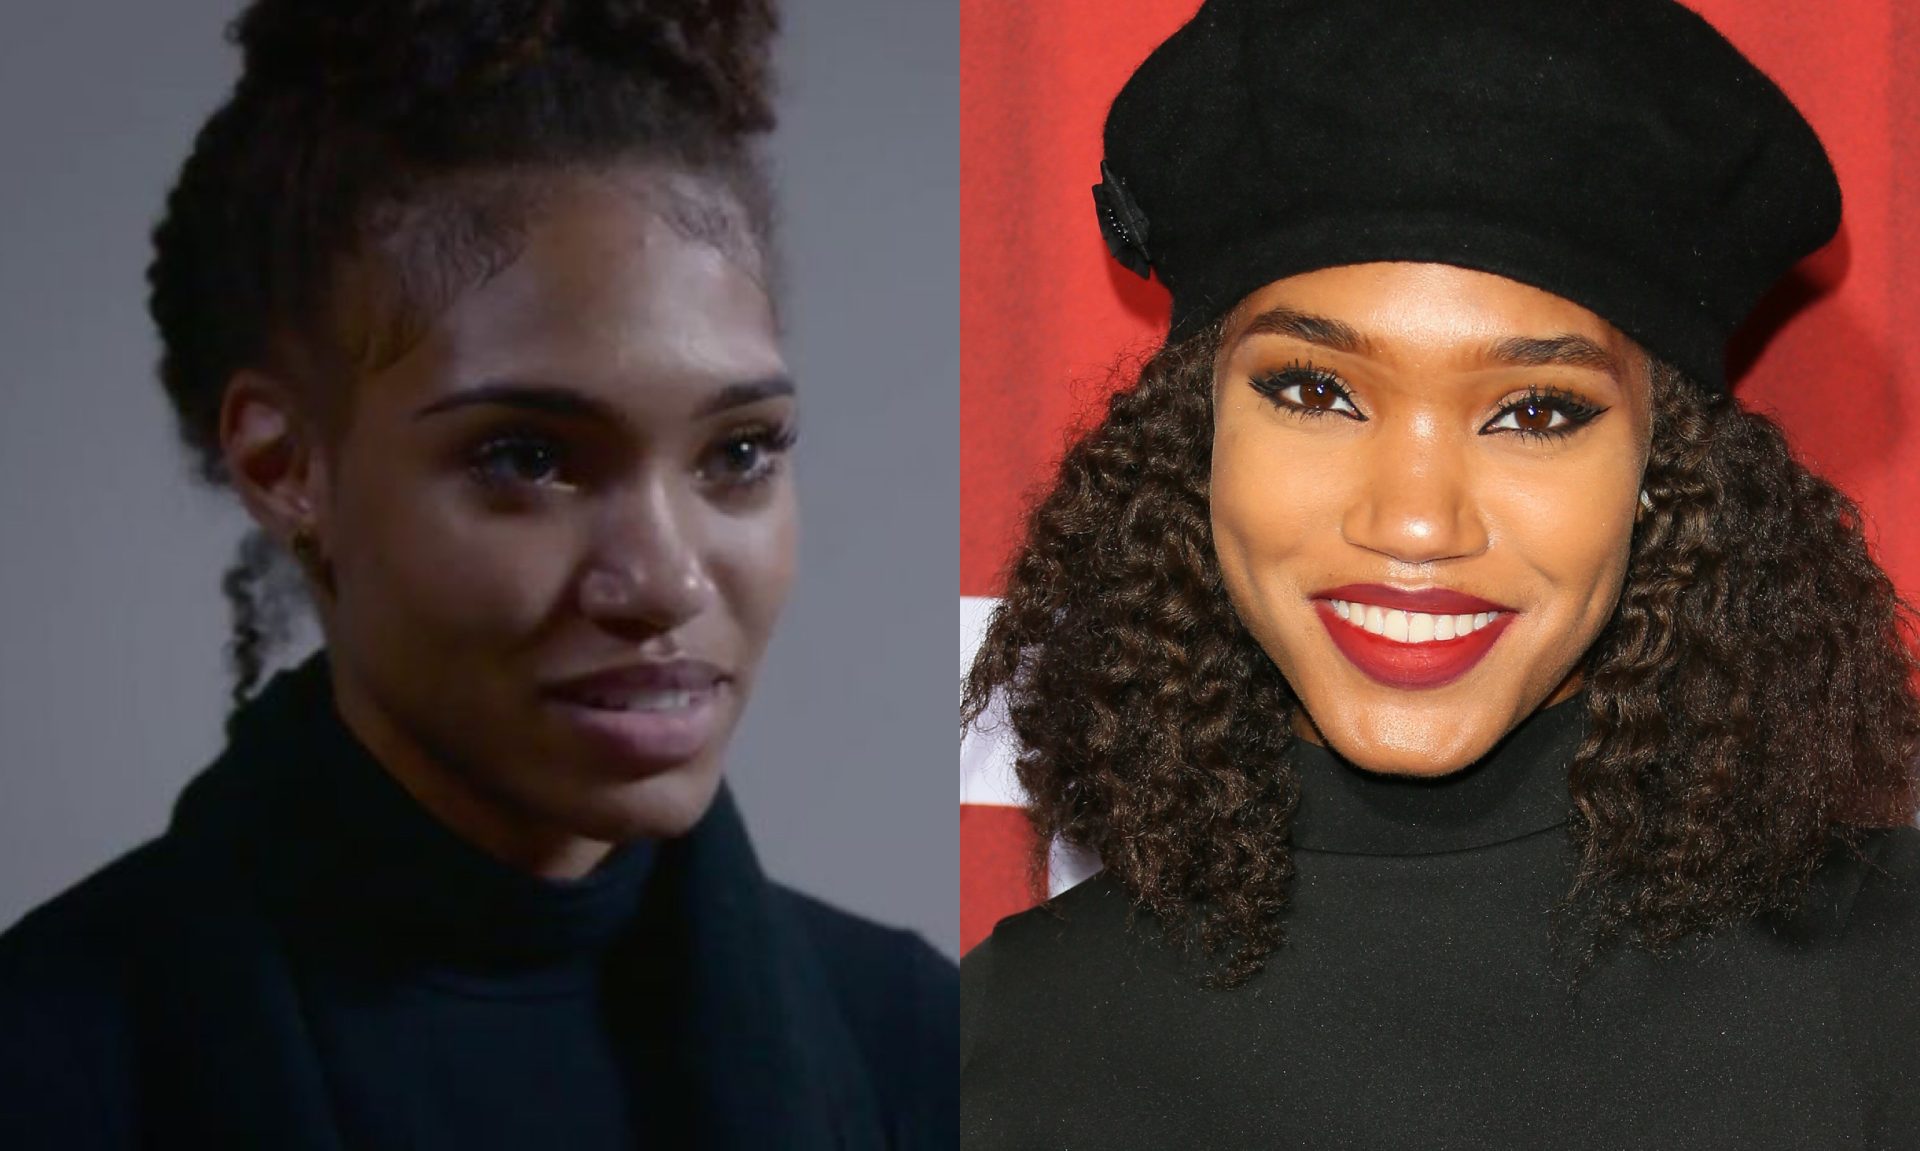 Video: Kourtney George, Woman Once Known As #HurtBae Online, Gets Engaged